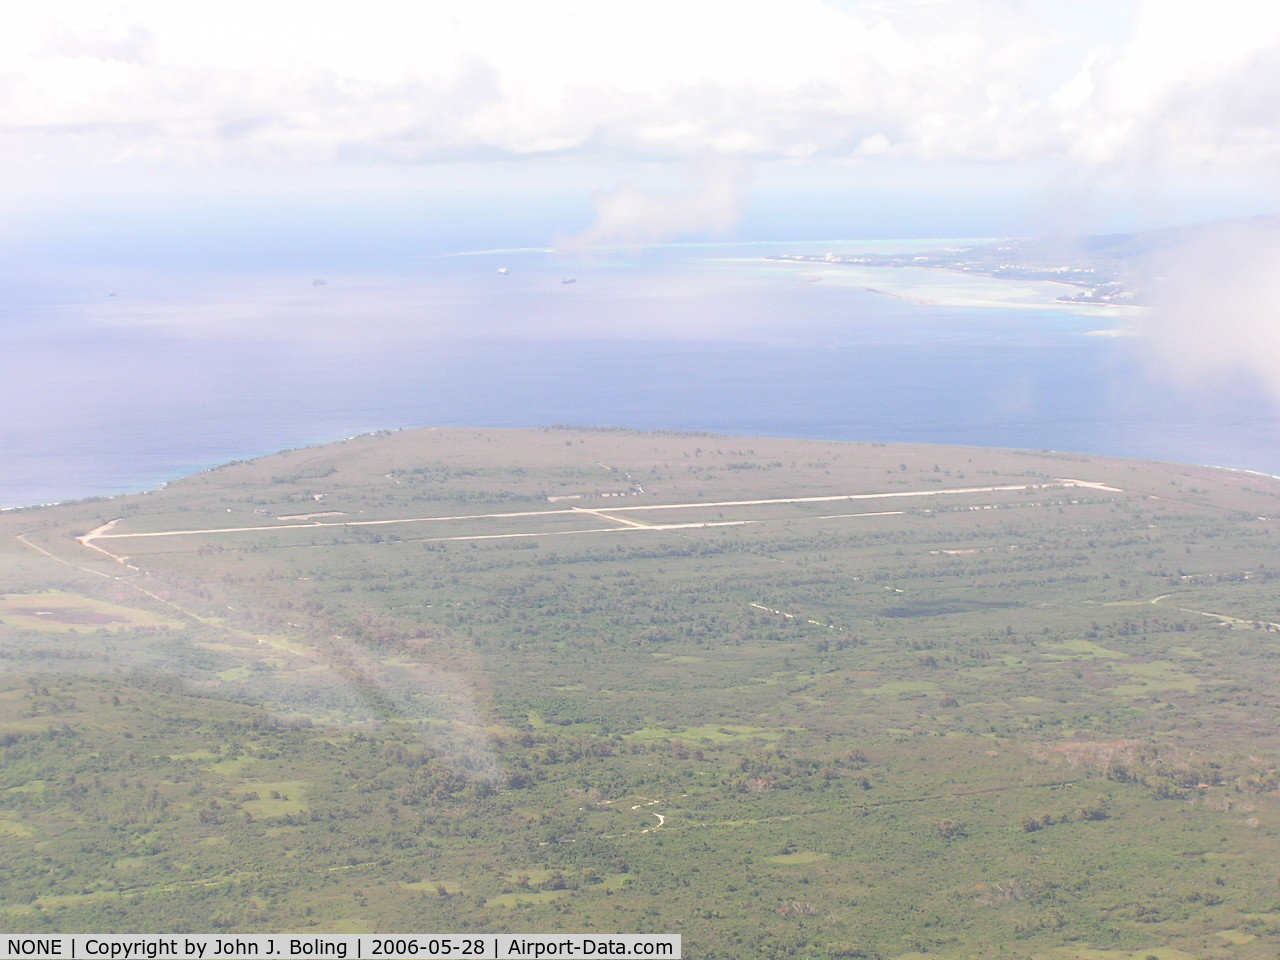 NONE Airport - Unused WW2 airfied on northern end of Tinian, Saipan in upper right of photo